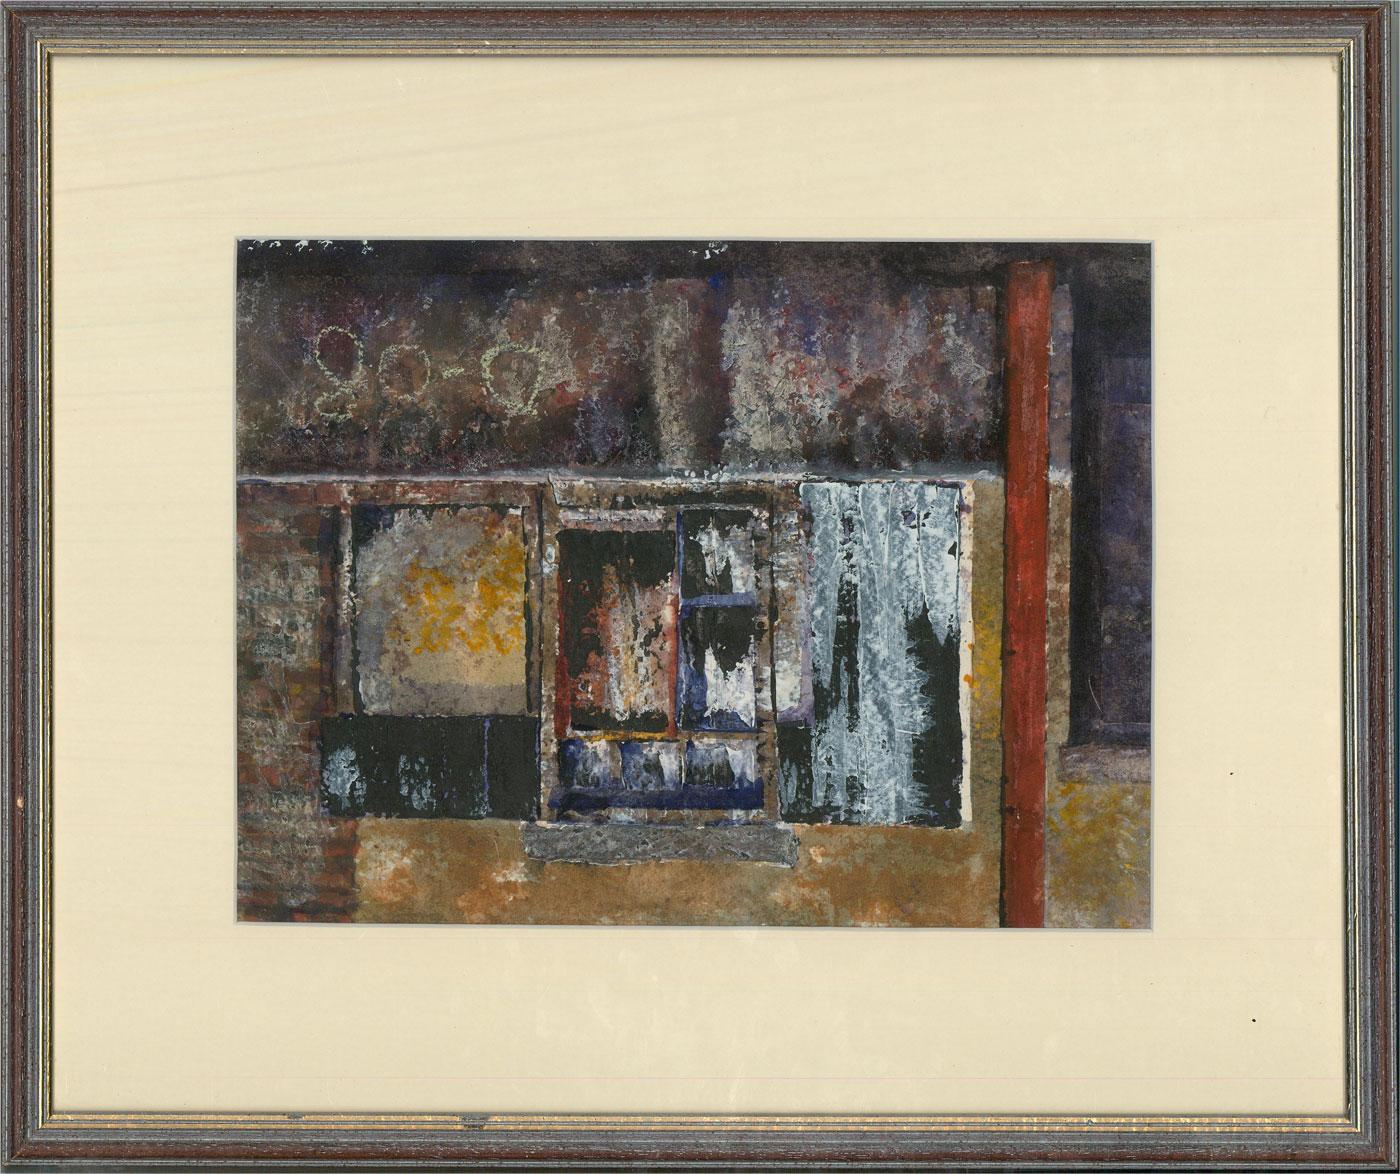 An engaging watercolour painting with acrylic and pastel details by the artist Peter Clarkson. The scene depicts an abandoned, ruined house in Sicily. Unsigned. There is an artist's label on the reverse inscribed with the artist's name and title.